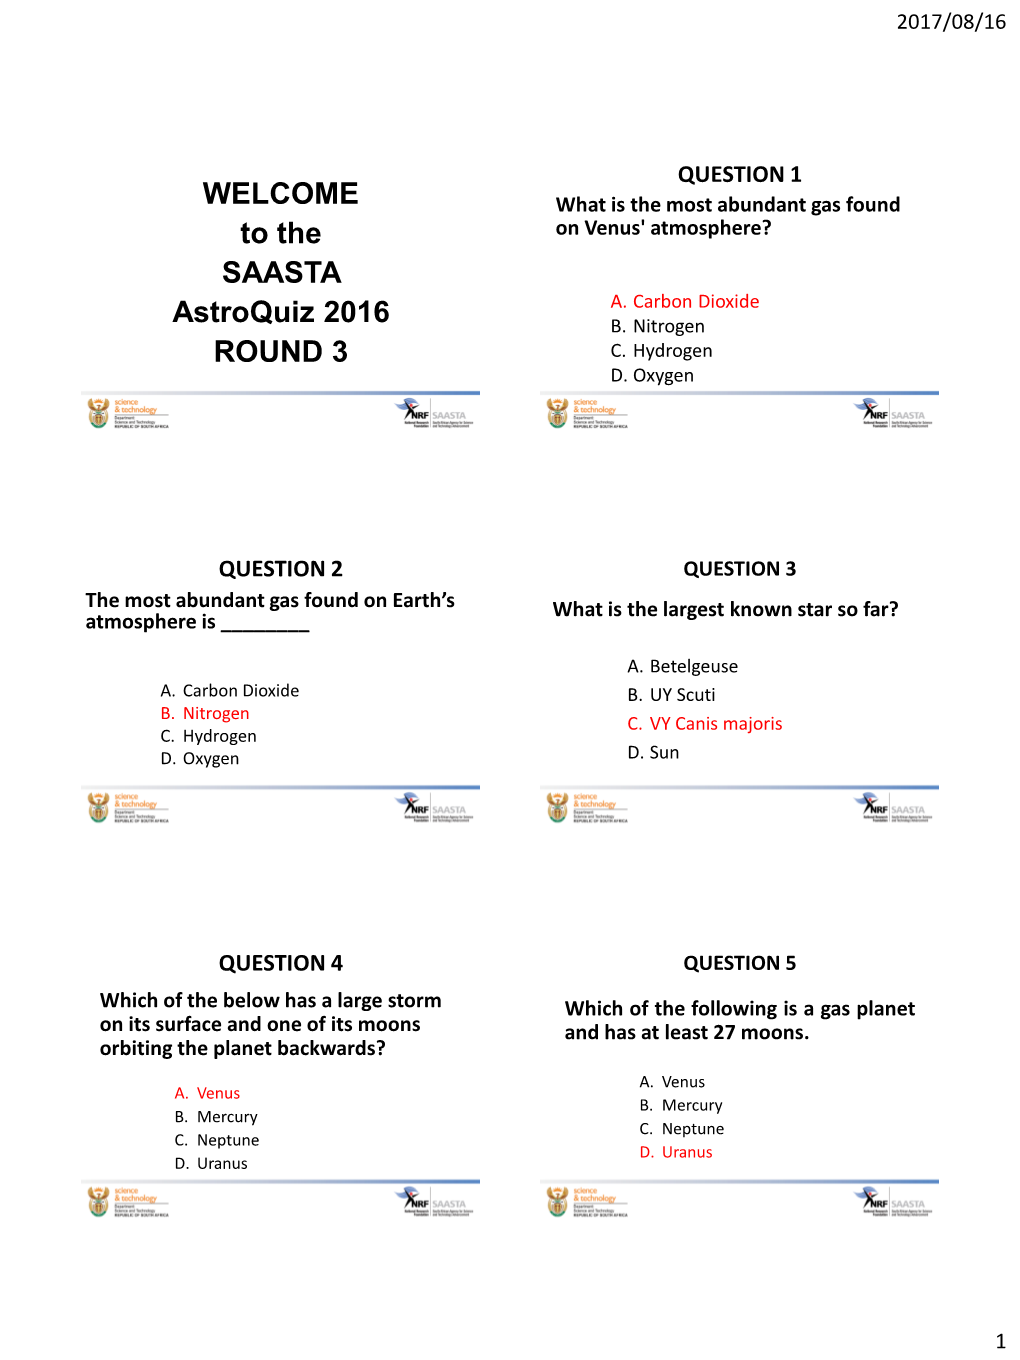 WELCOME to the SAASTA Astroquiz 2016 ROUND 3